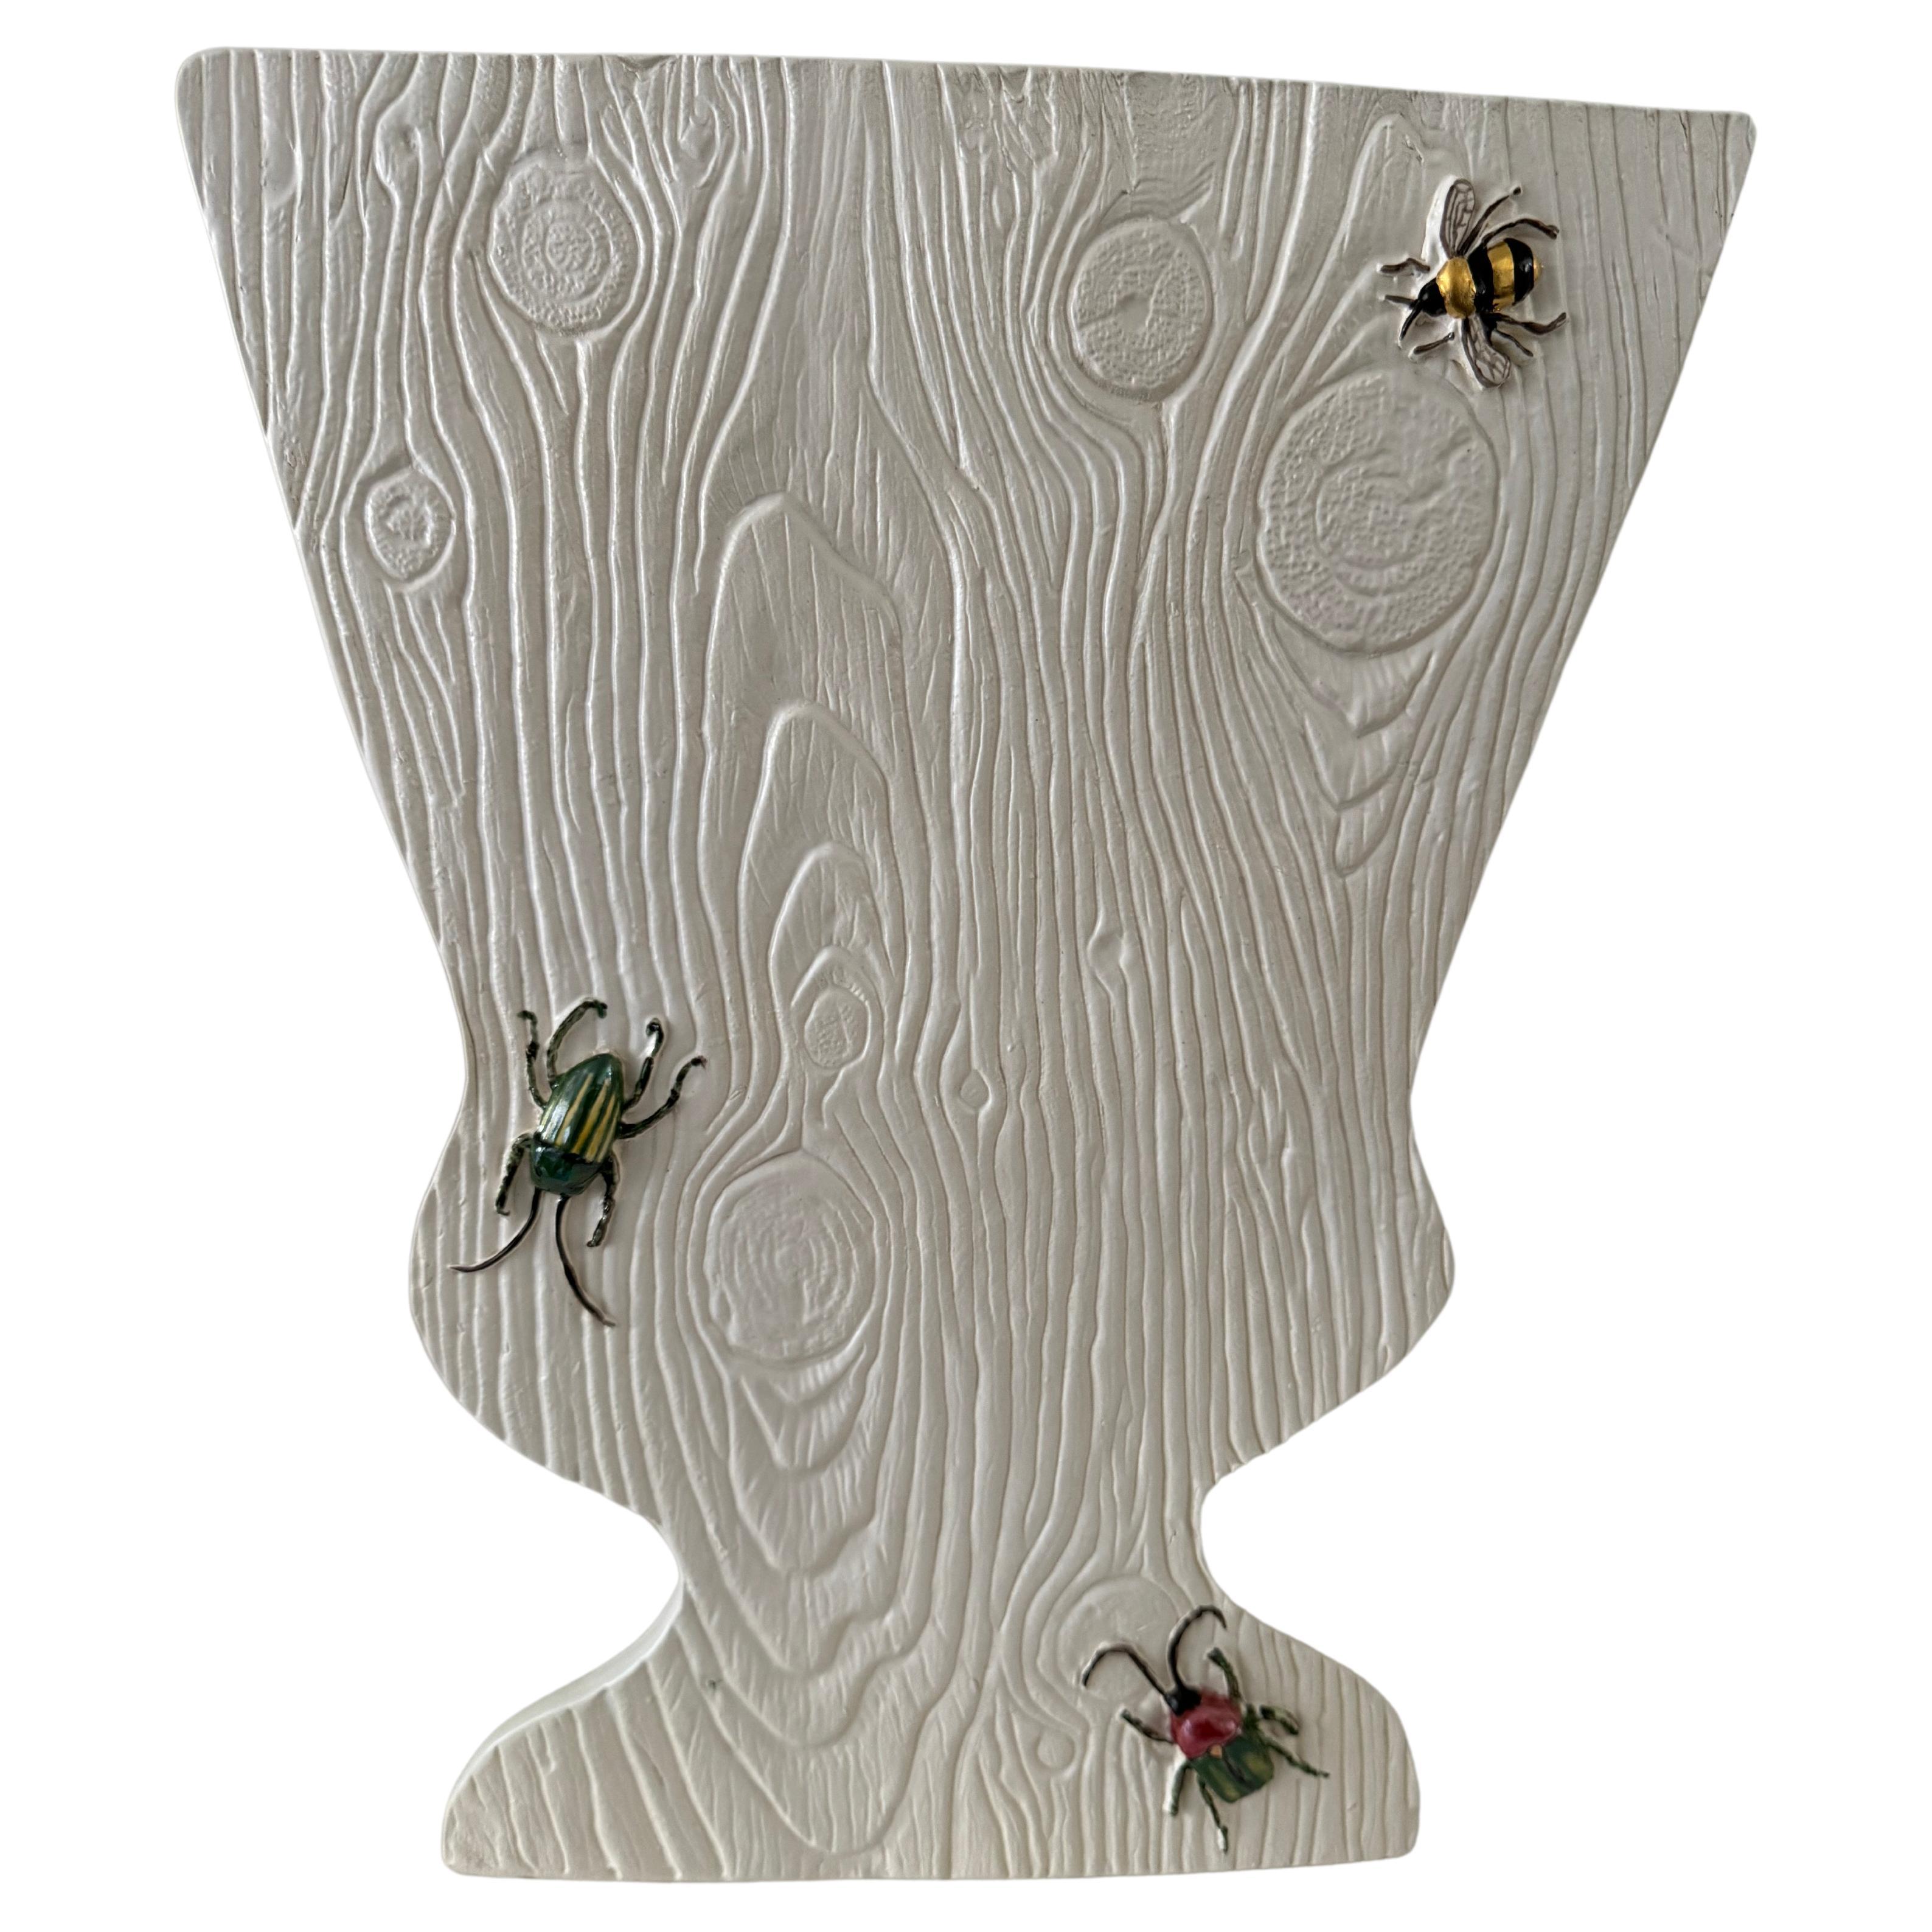 Faux bois silhouette vase with sculpted hand painted bugs For Sale